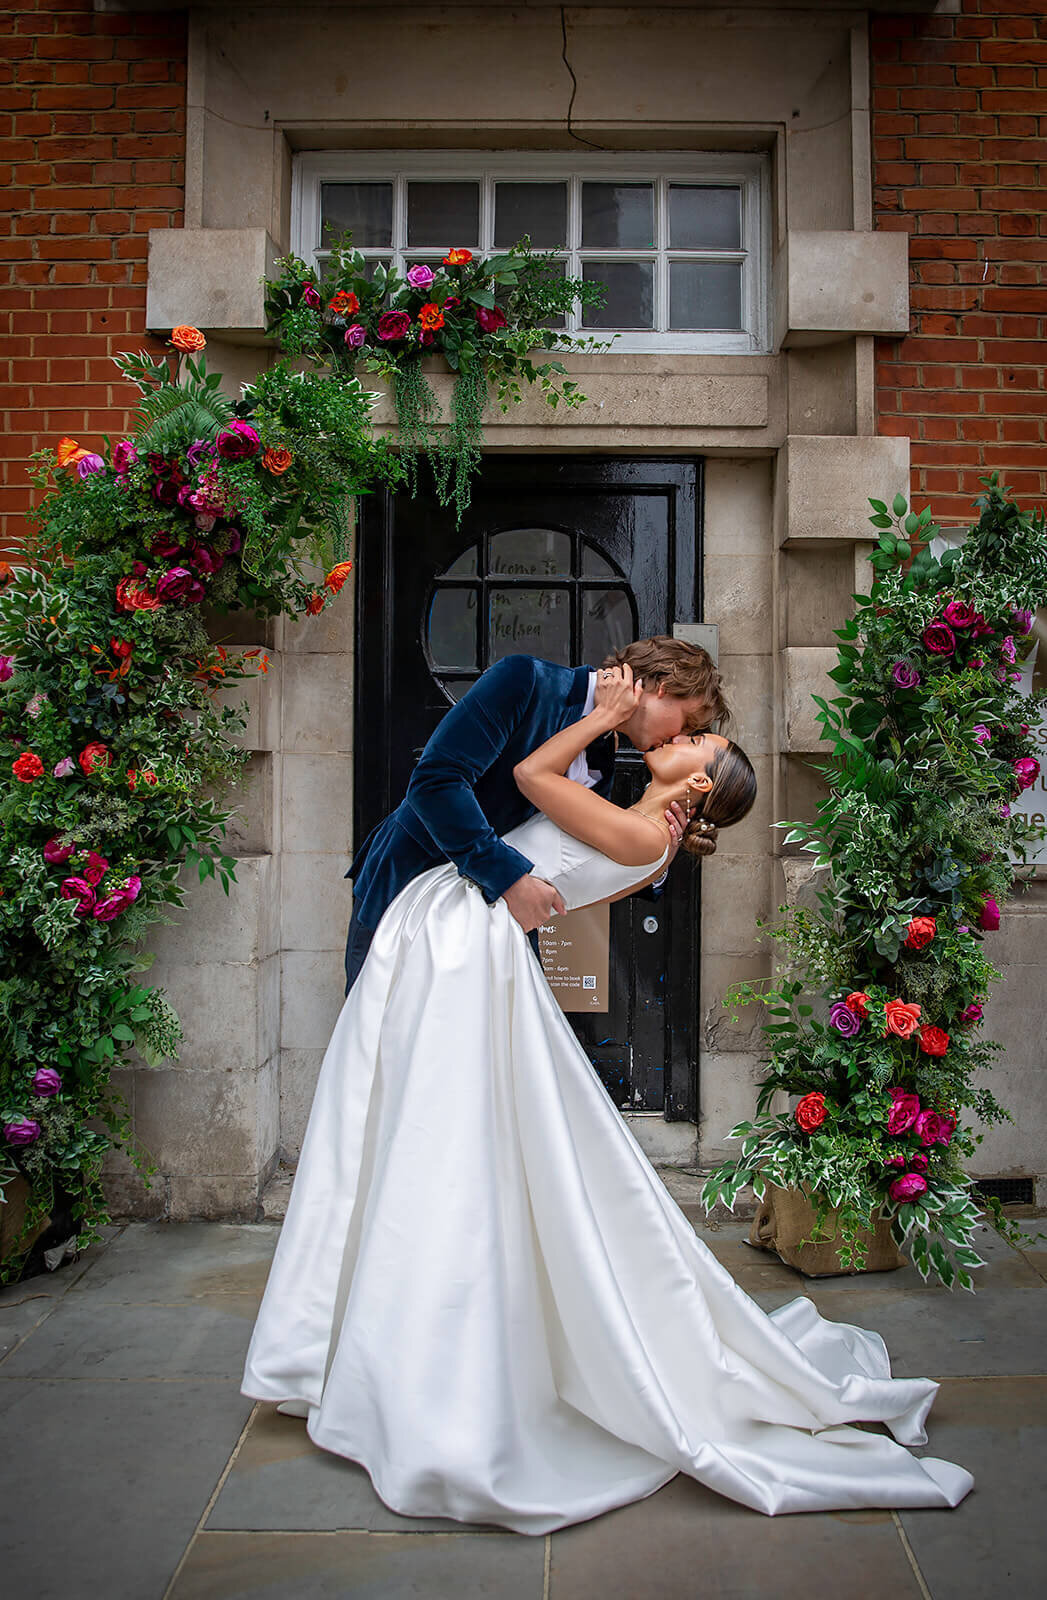 Bride and groom kissing outside The Chelsea Registry Office